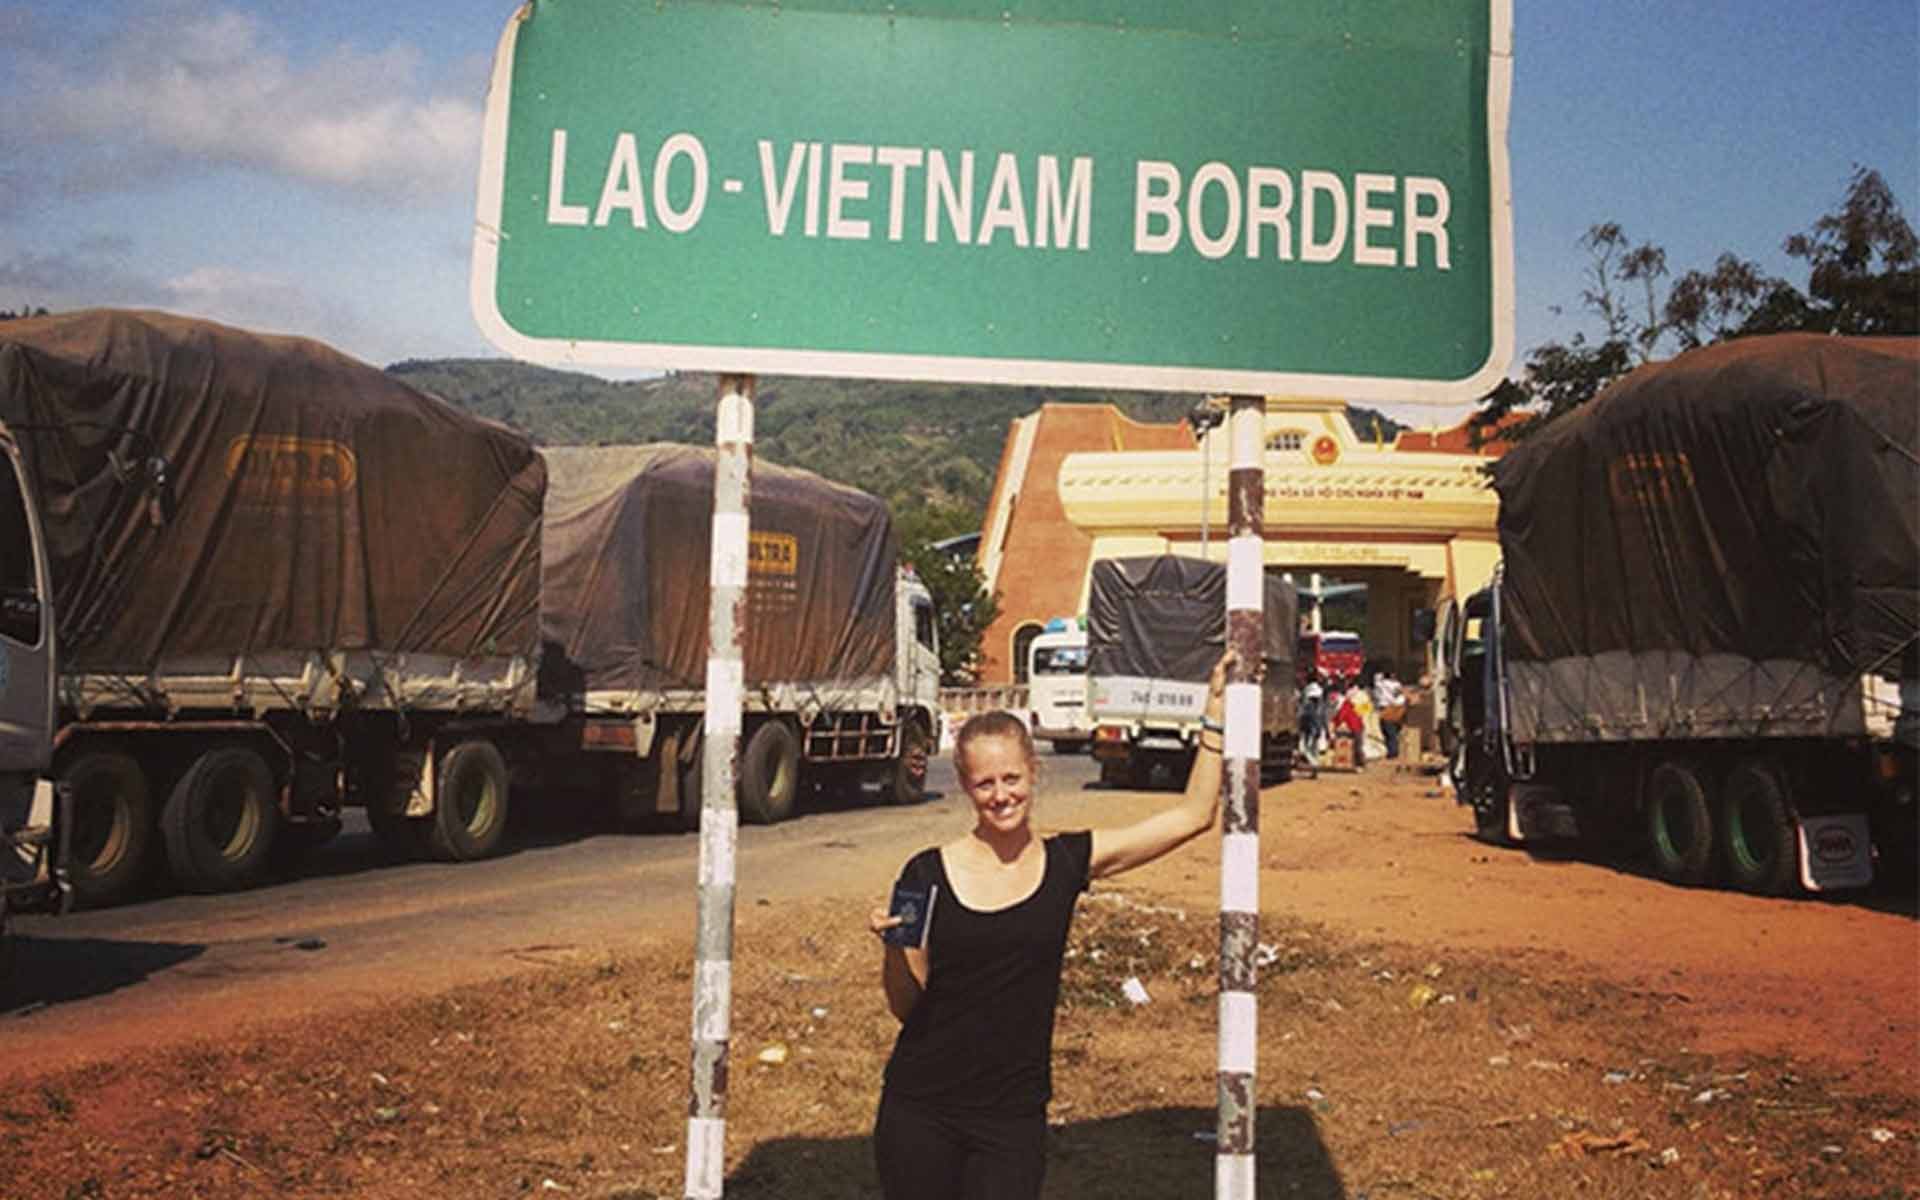 Laos - the only country without coastline in Southeast Asia